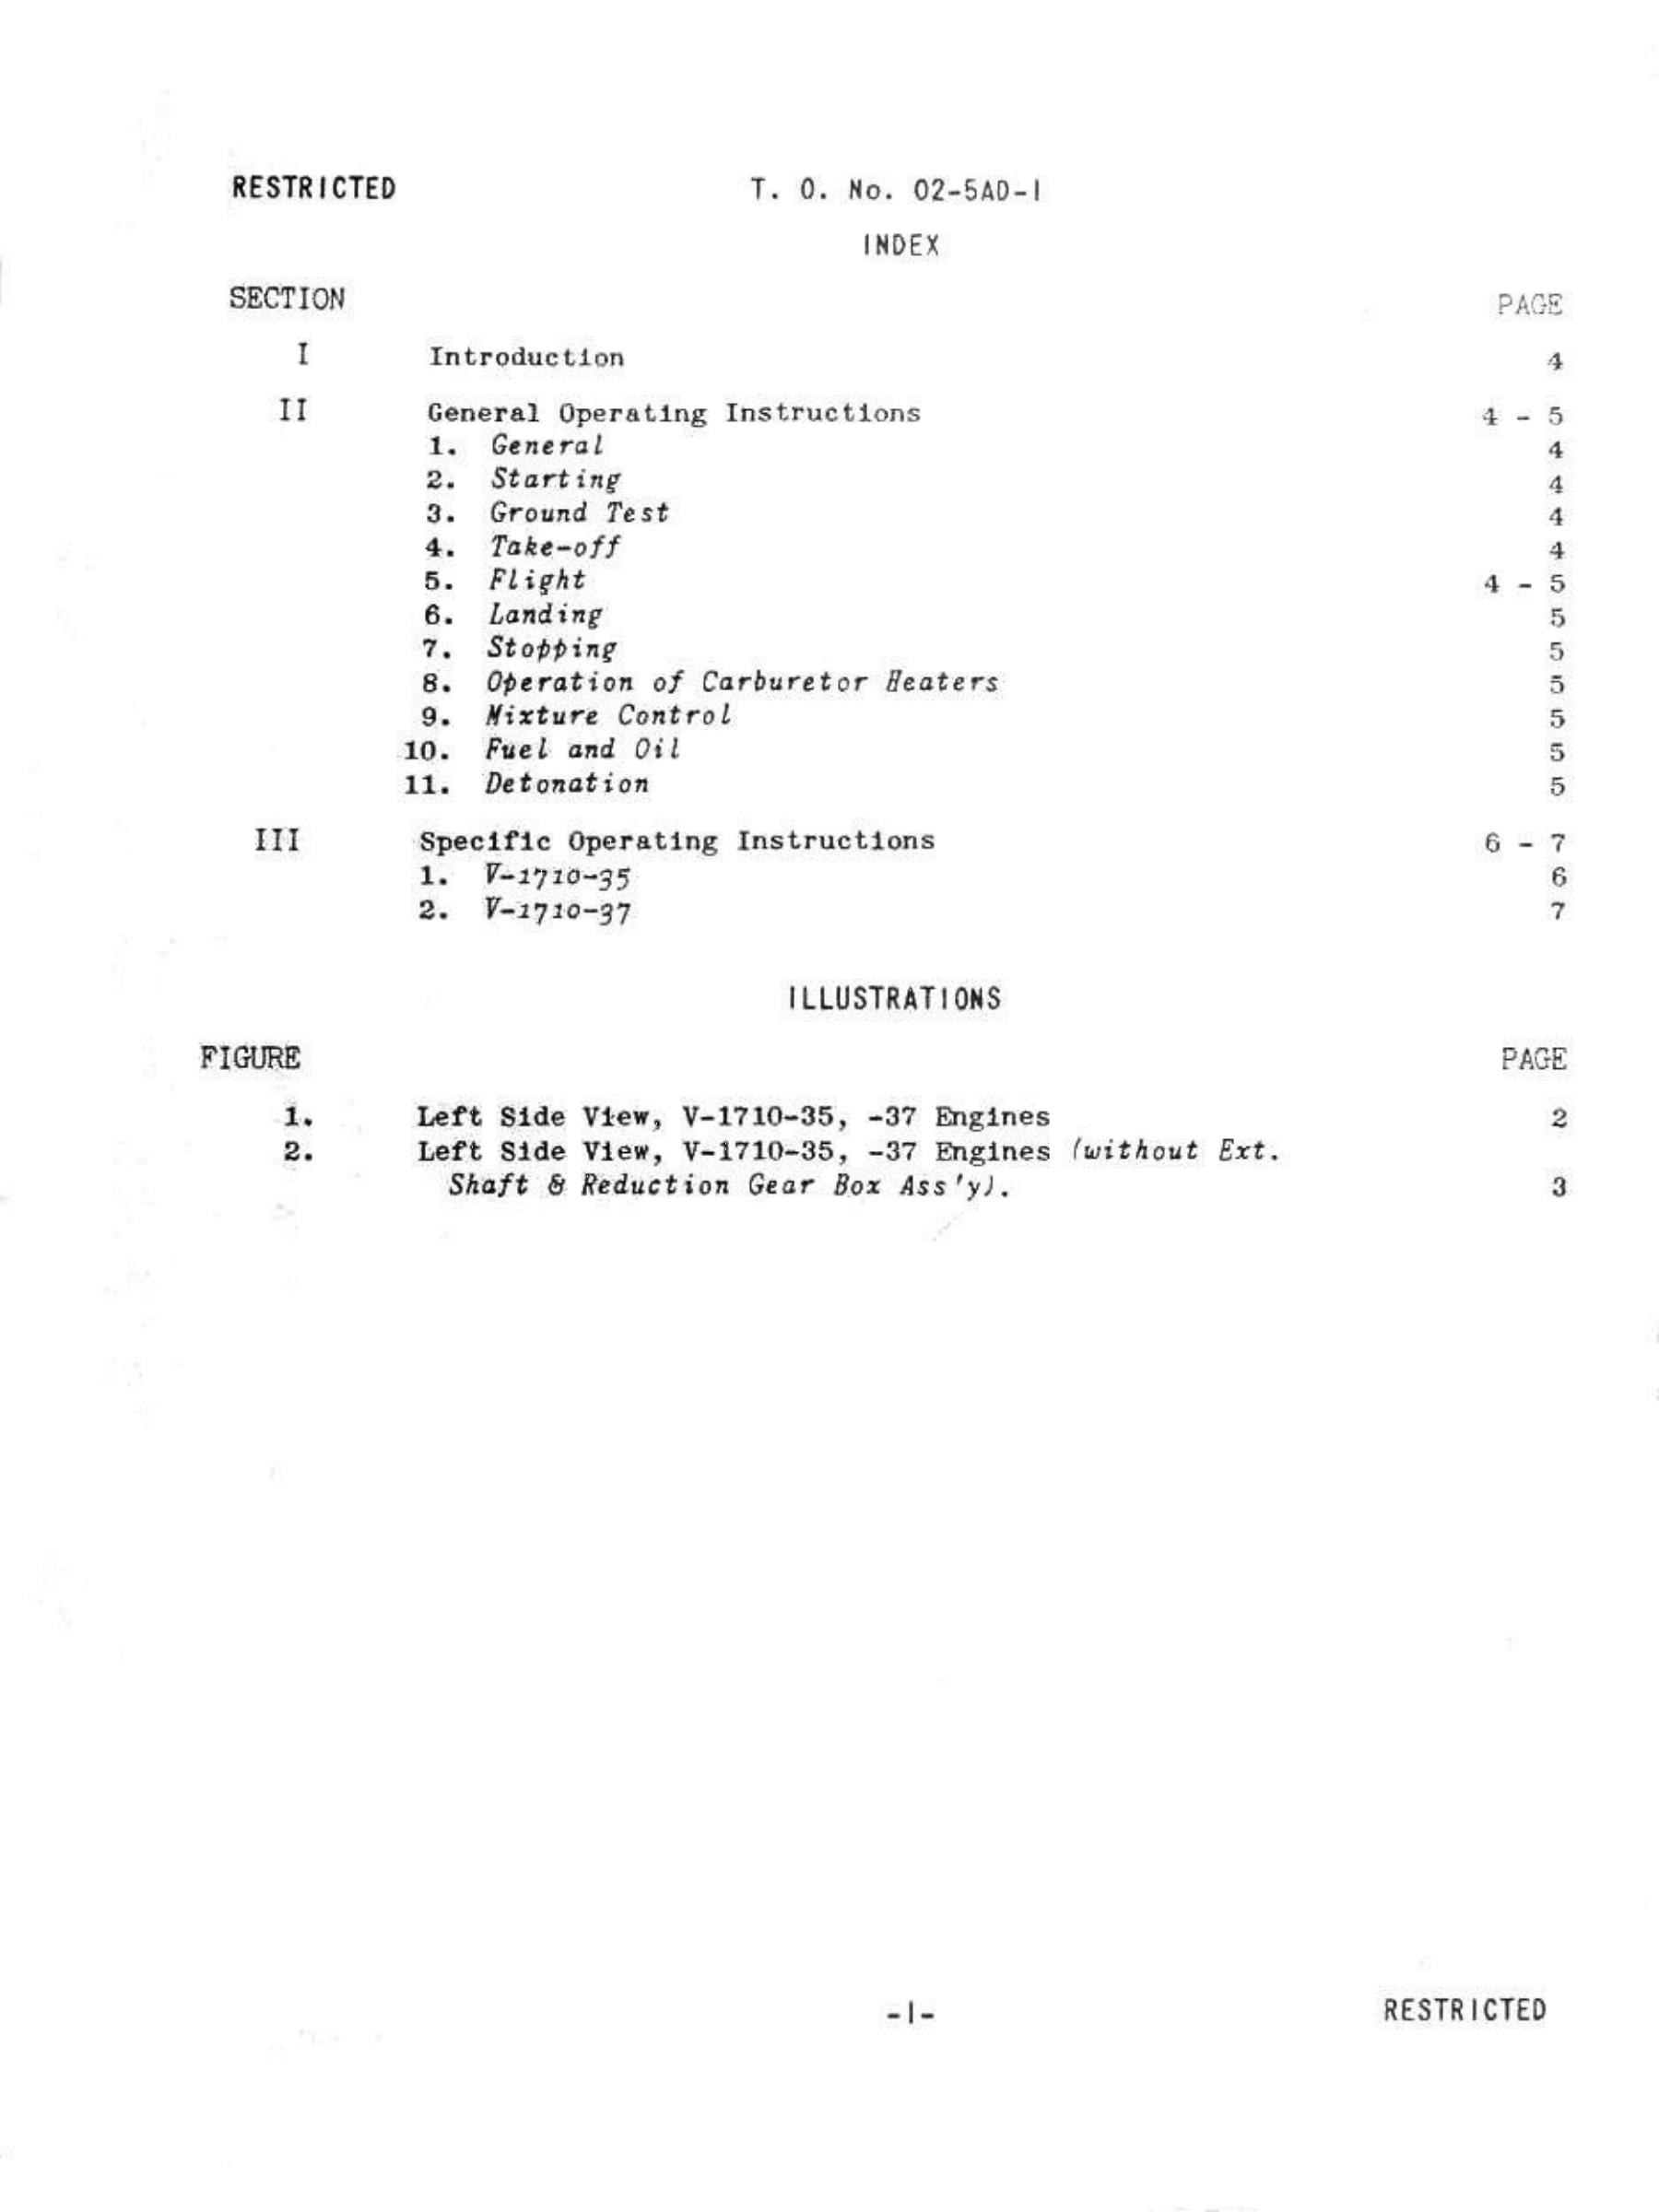 Sample page 2 from AirCorps Library document: Op and Flight Inst for the Model V-1710-35 Engine and Associated Models